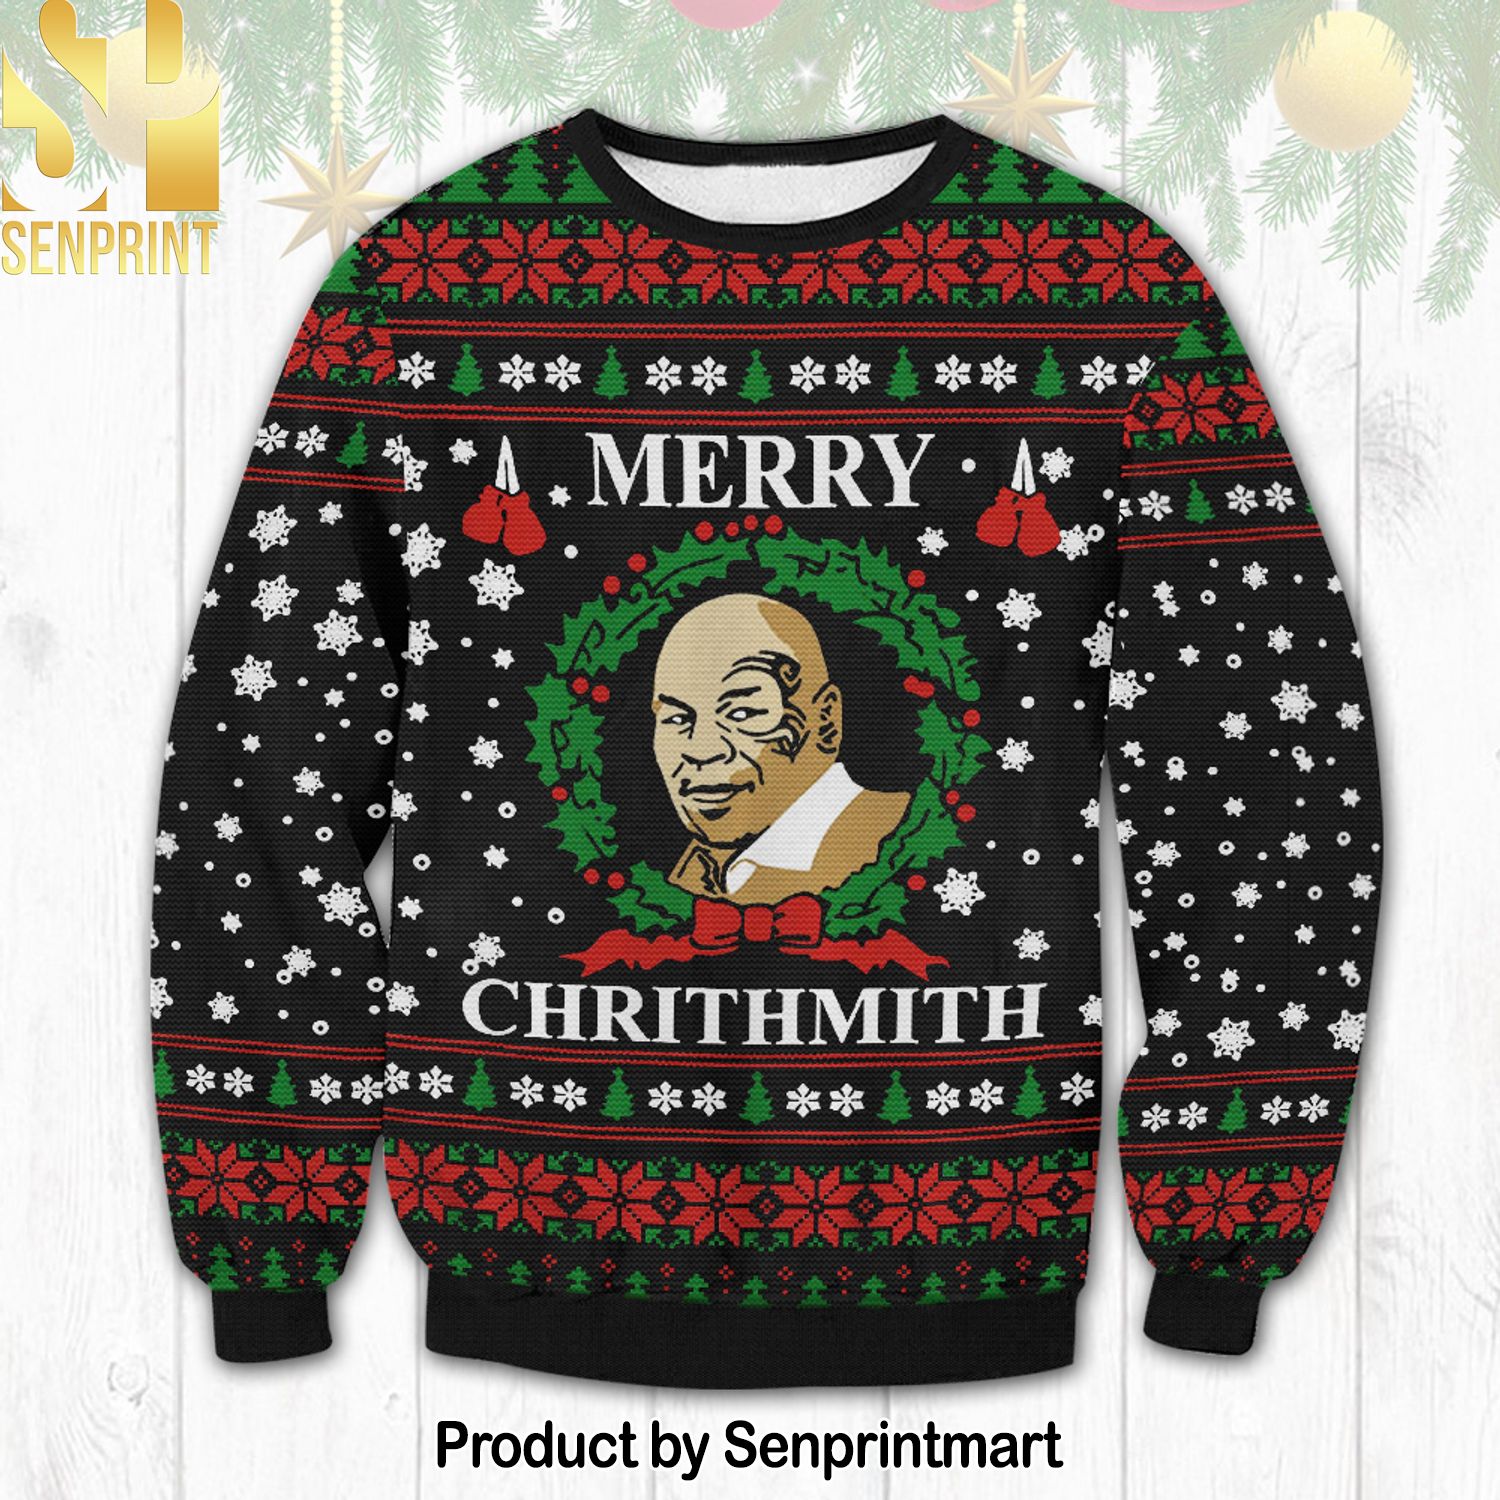 Mike Tyson Merry Chrithmiths Ugly Xmas Wool Knitted Sweater